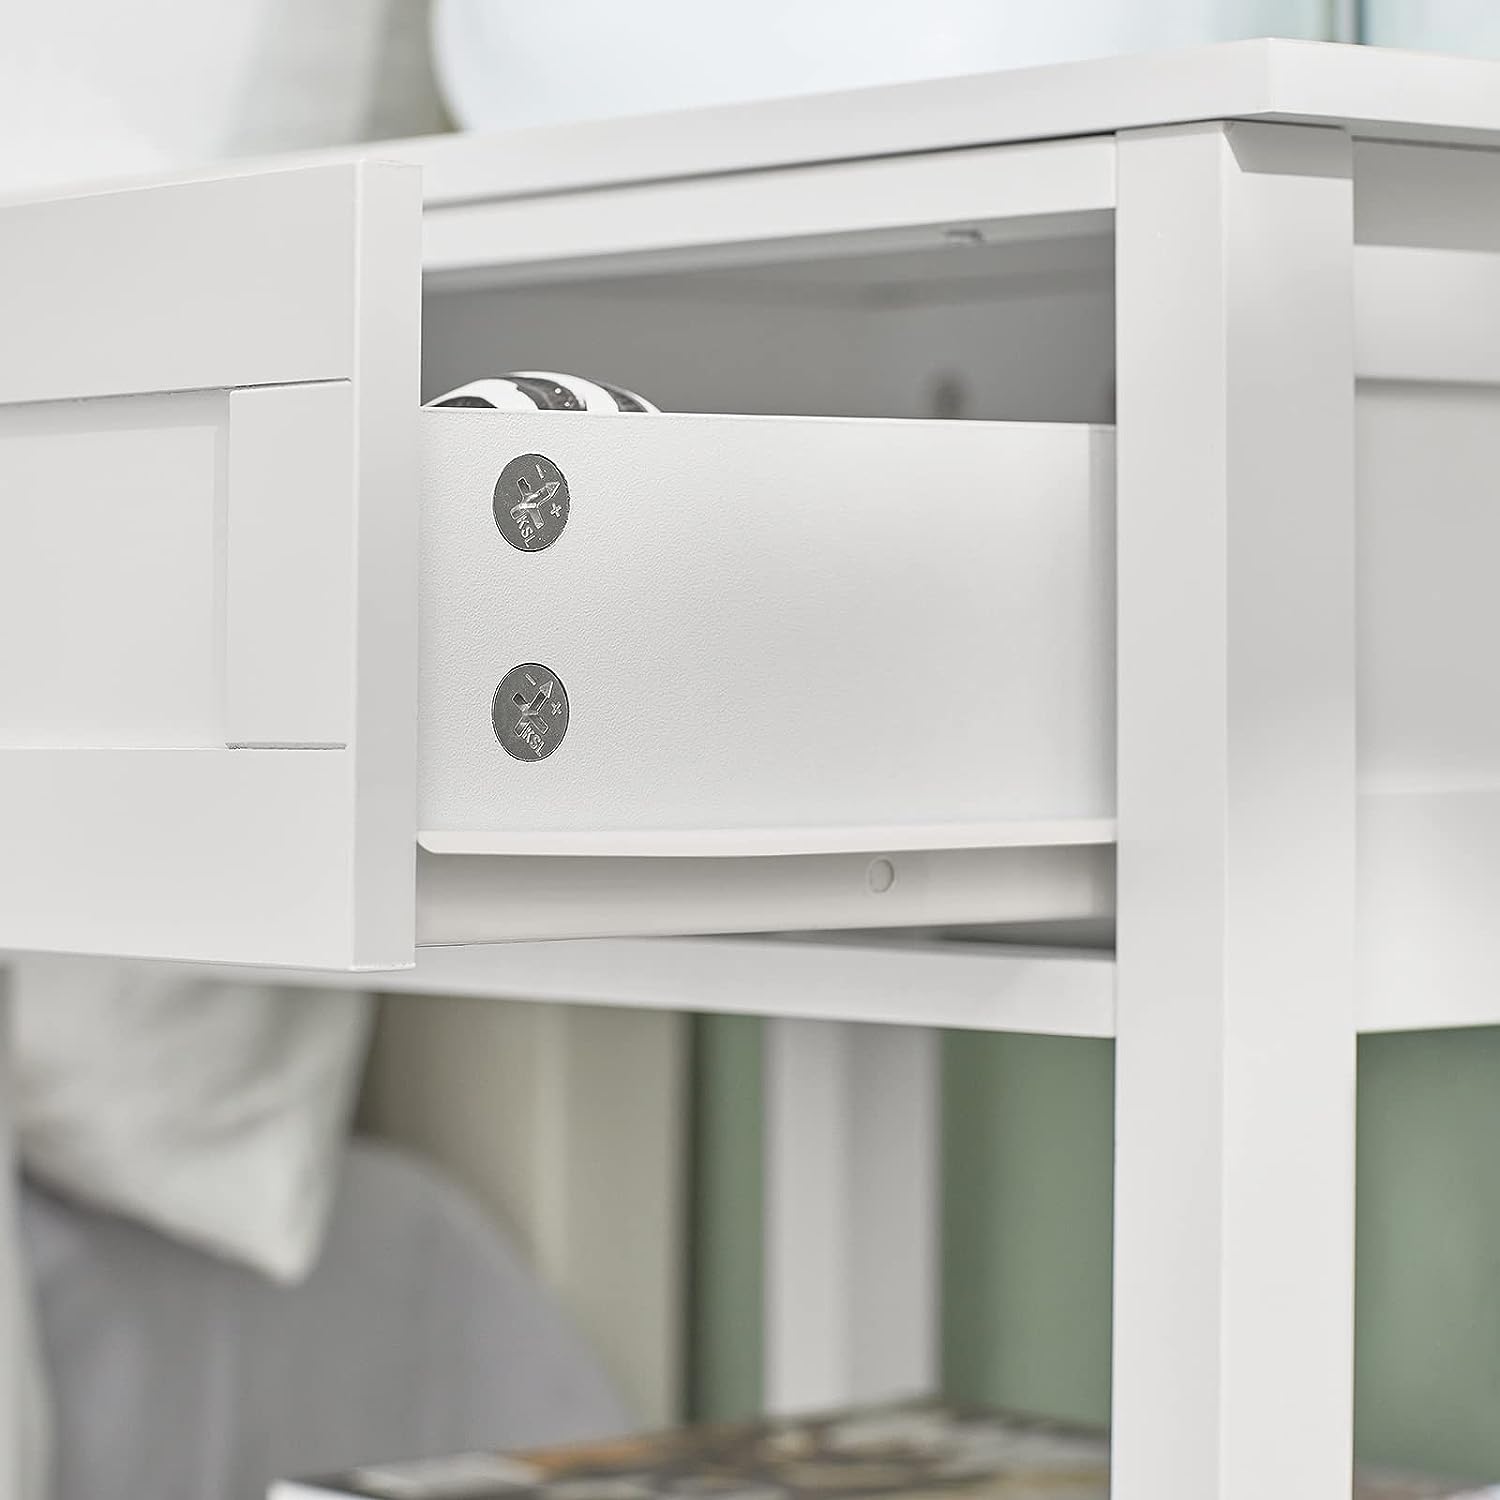 Bedside Table with Drawer Shelves - SILBERSHELL